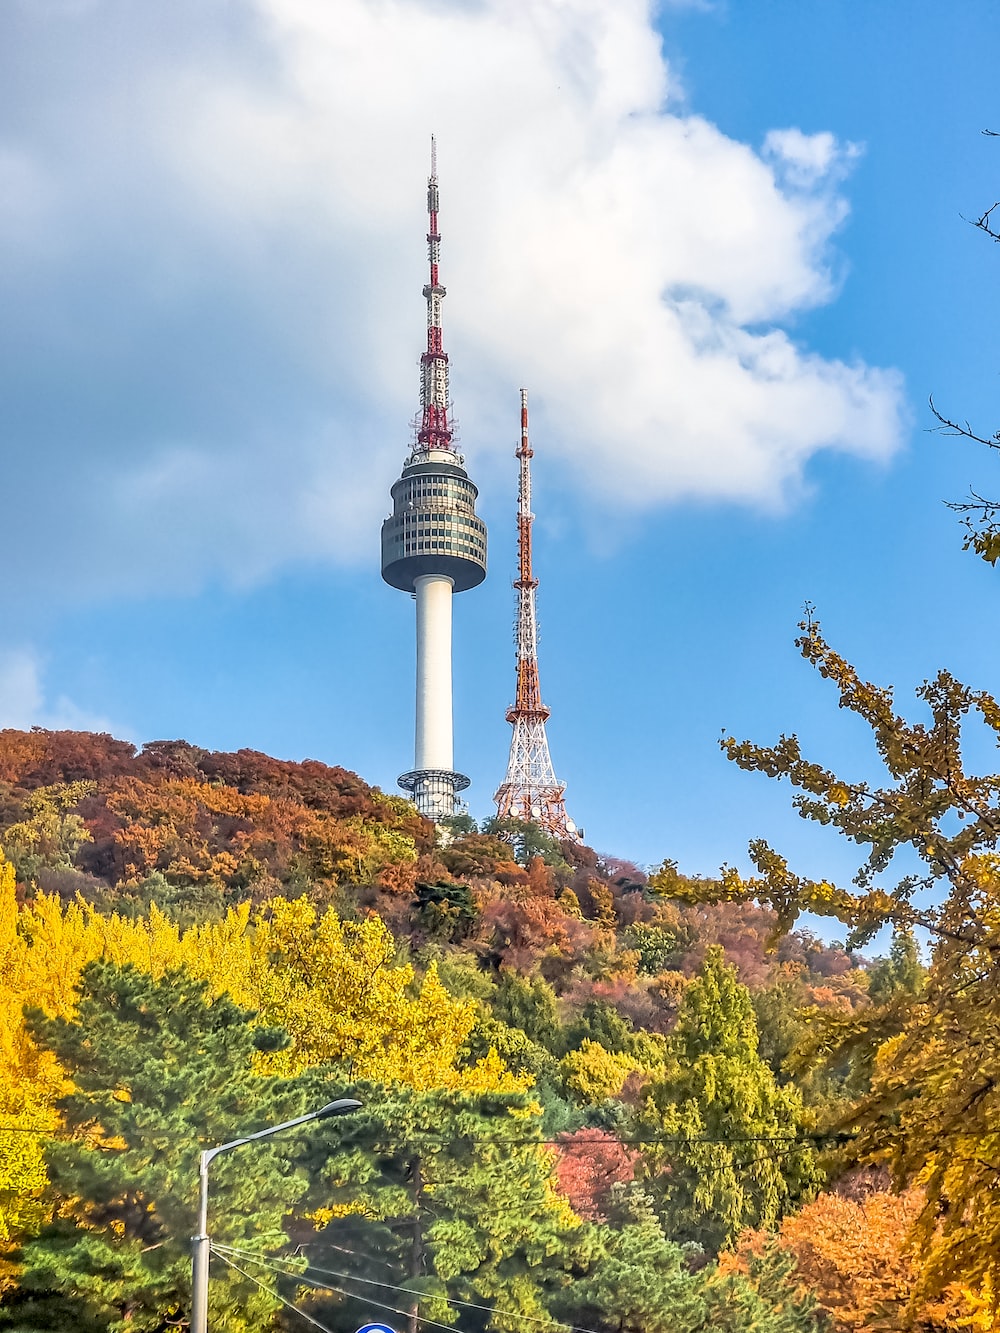 Namsan Seoul Tower Picture. Download Free Image